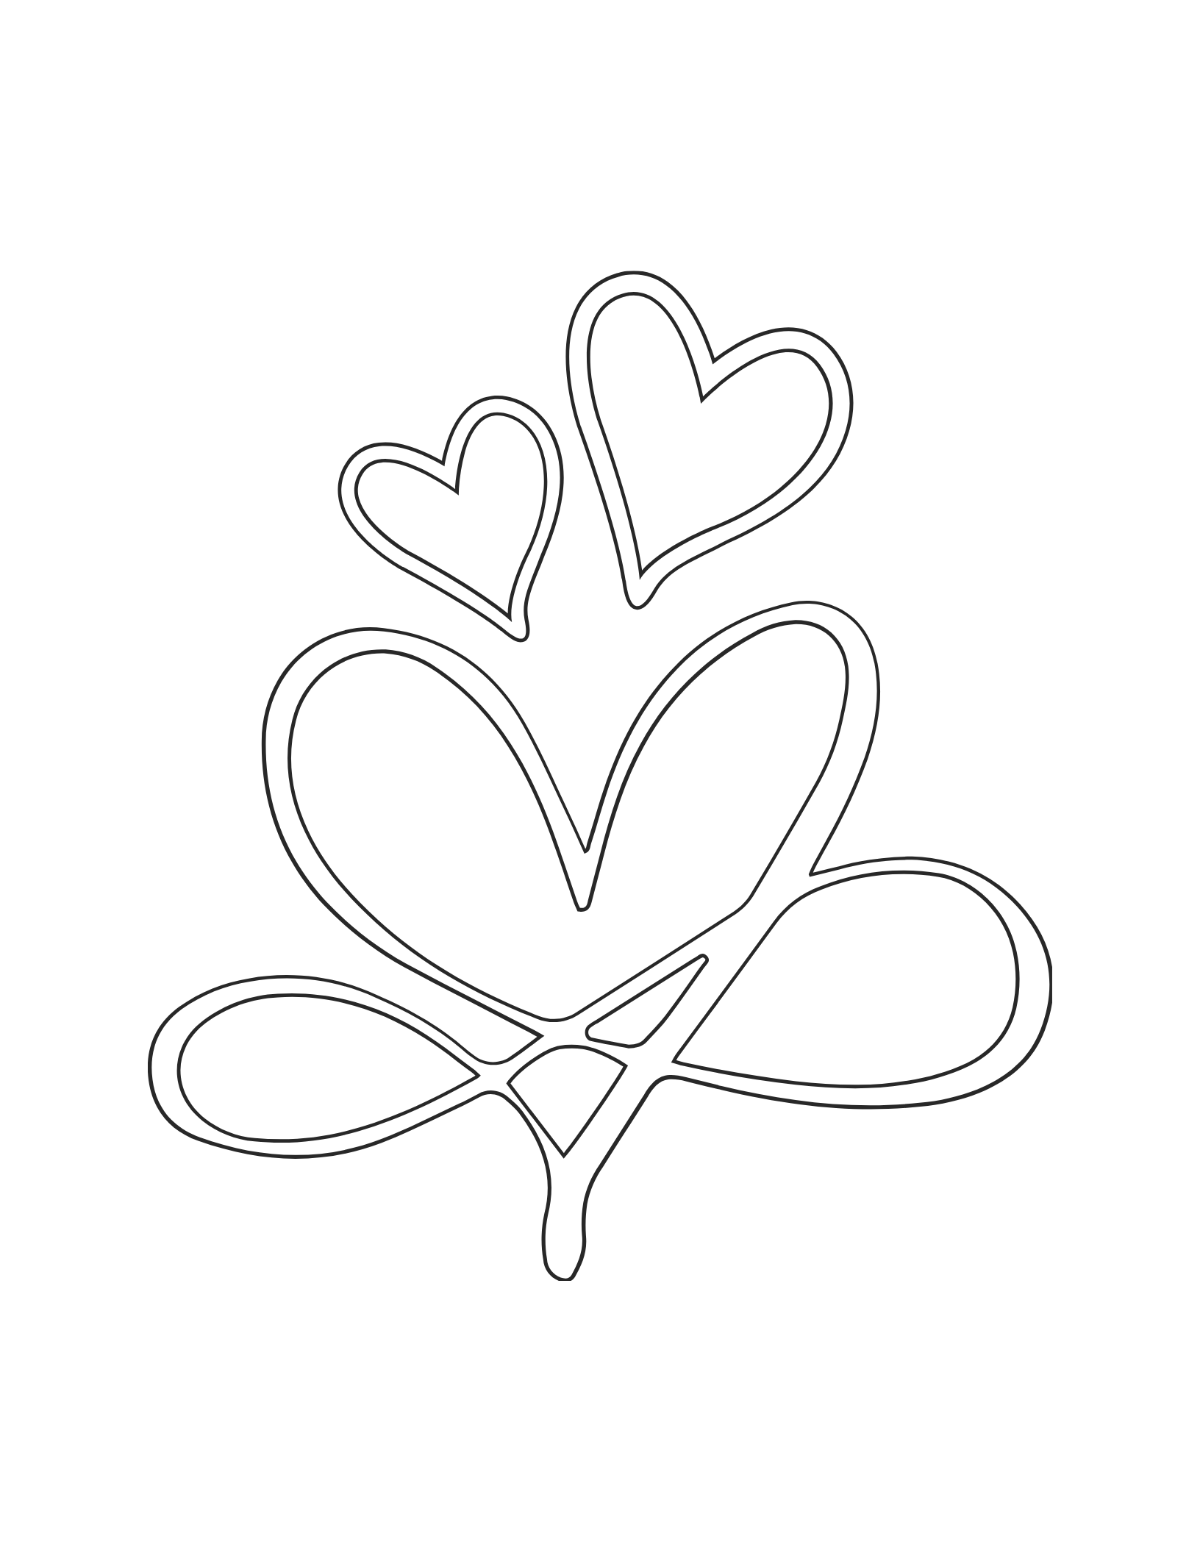 Abstract Heart Outline Coloring Page Template